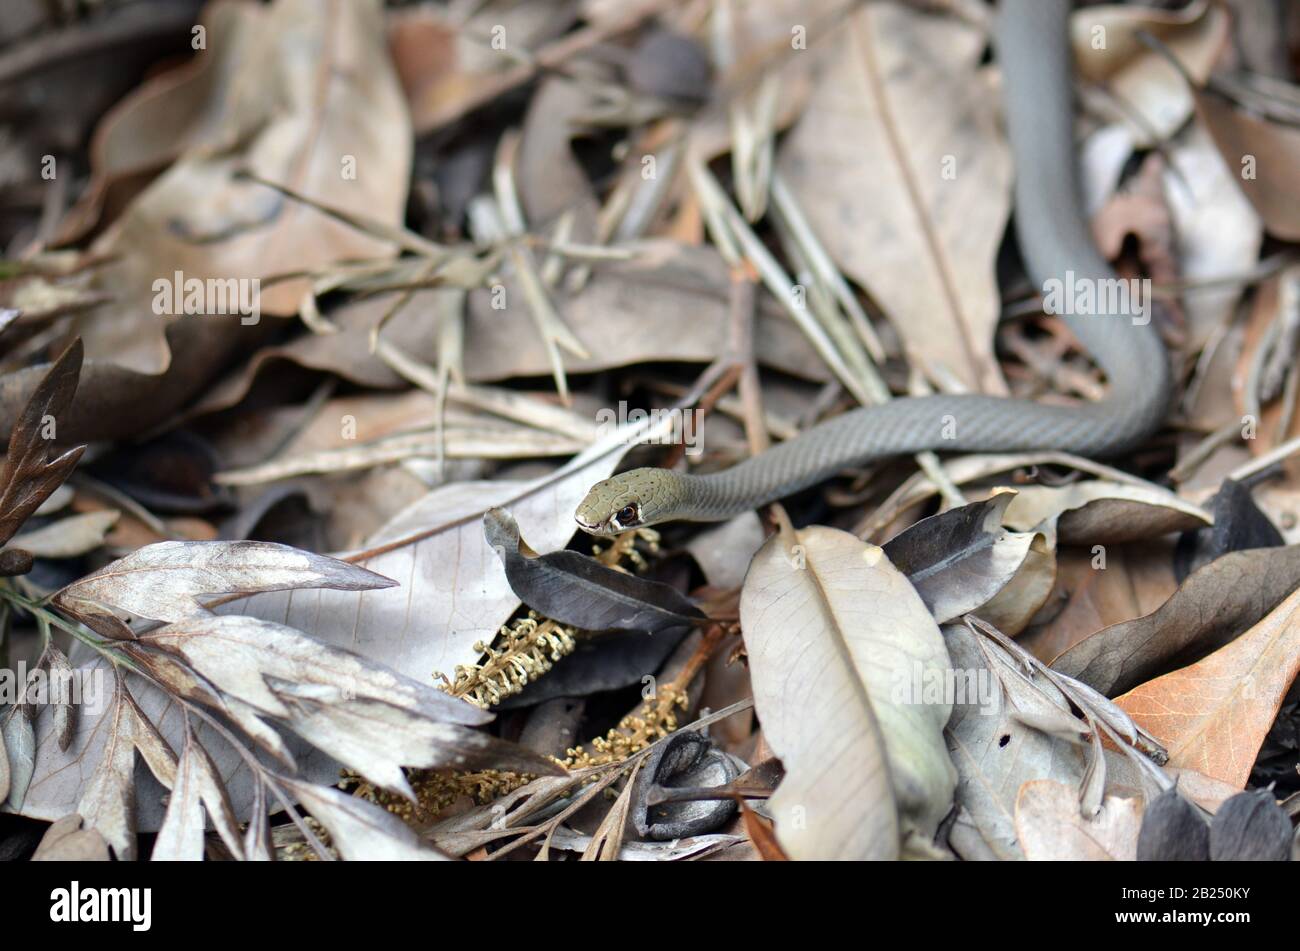 Australian native small venomous elapid, the Yellow faced Whip Snake, Demansia psammophis, family Elapidae, in leaf litter of a Sydney garden, NSW, Au Stock Photo